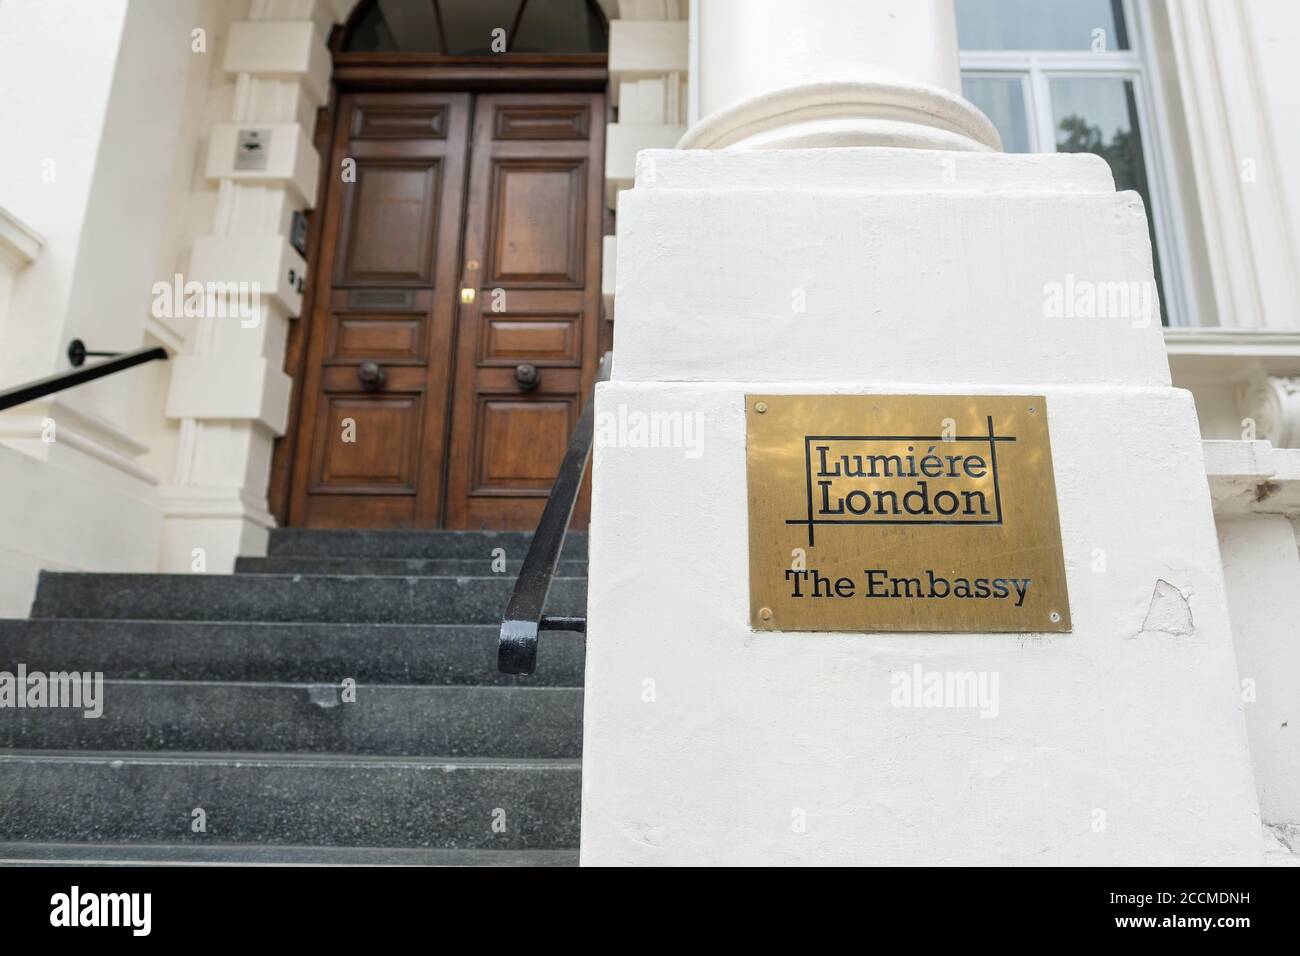 The Embassy- Lumiere London, an upmarket events venue in Belgravia Stock Photo